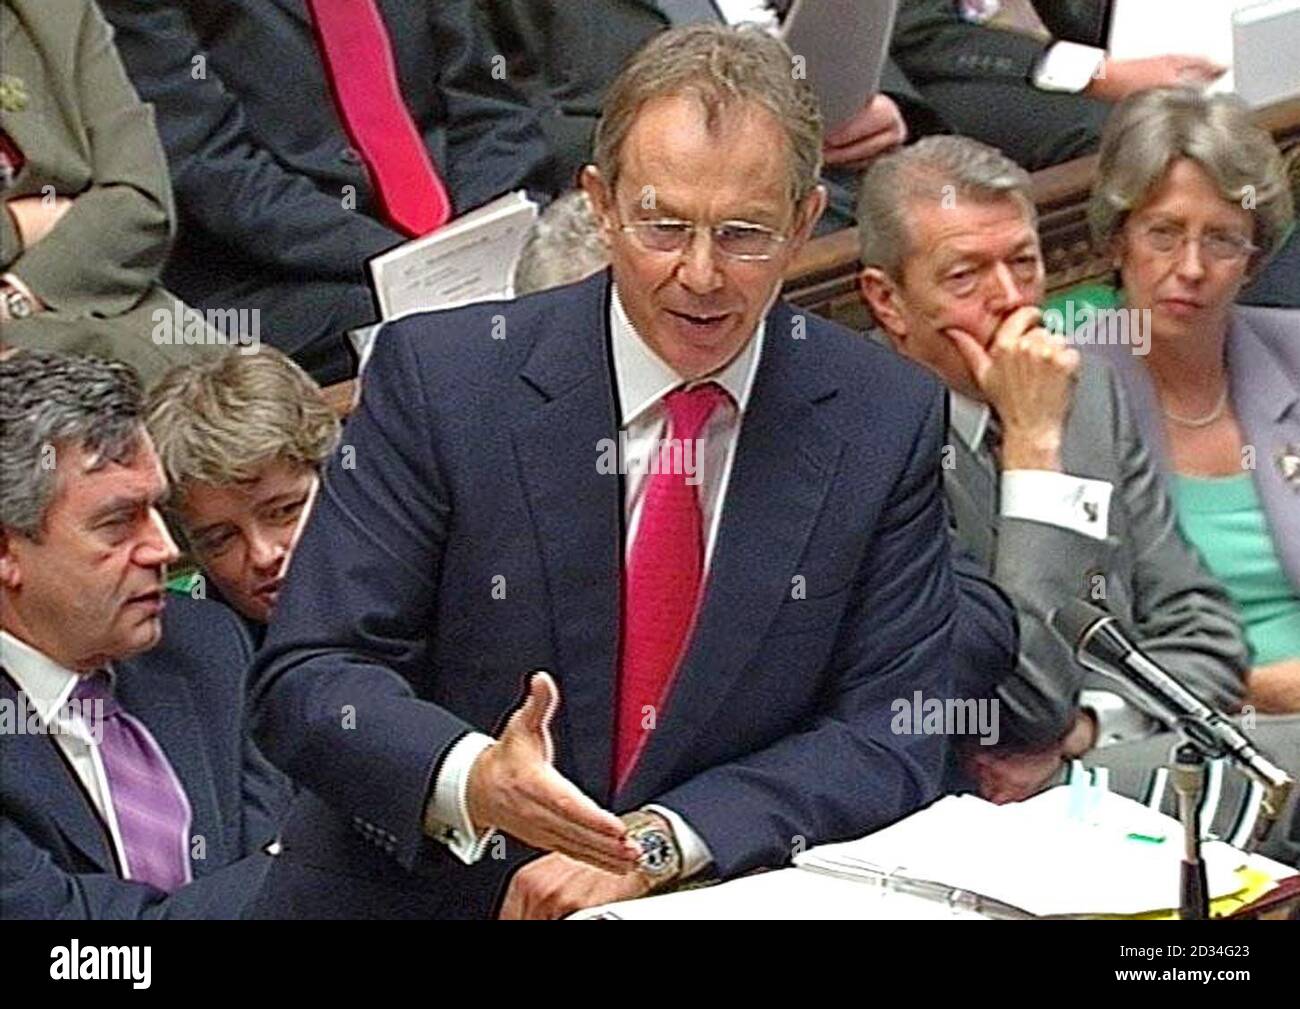 Britain's Prime Minister Tony Blair speaks during the weekly Question Time in the House of Commons, London, Wednesday December 7, 2005. PRESS ASSOCIATION Photo. Photo credit should read: PA Stock Photo